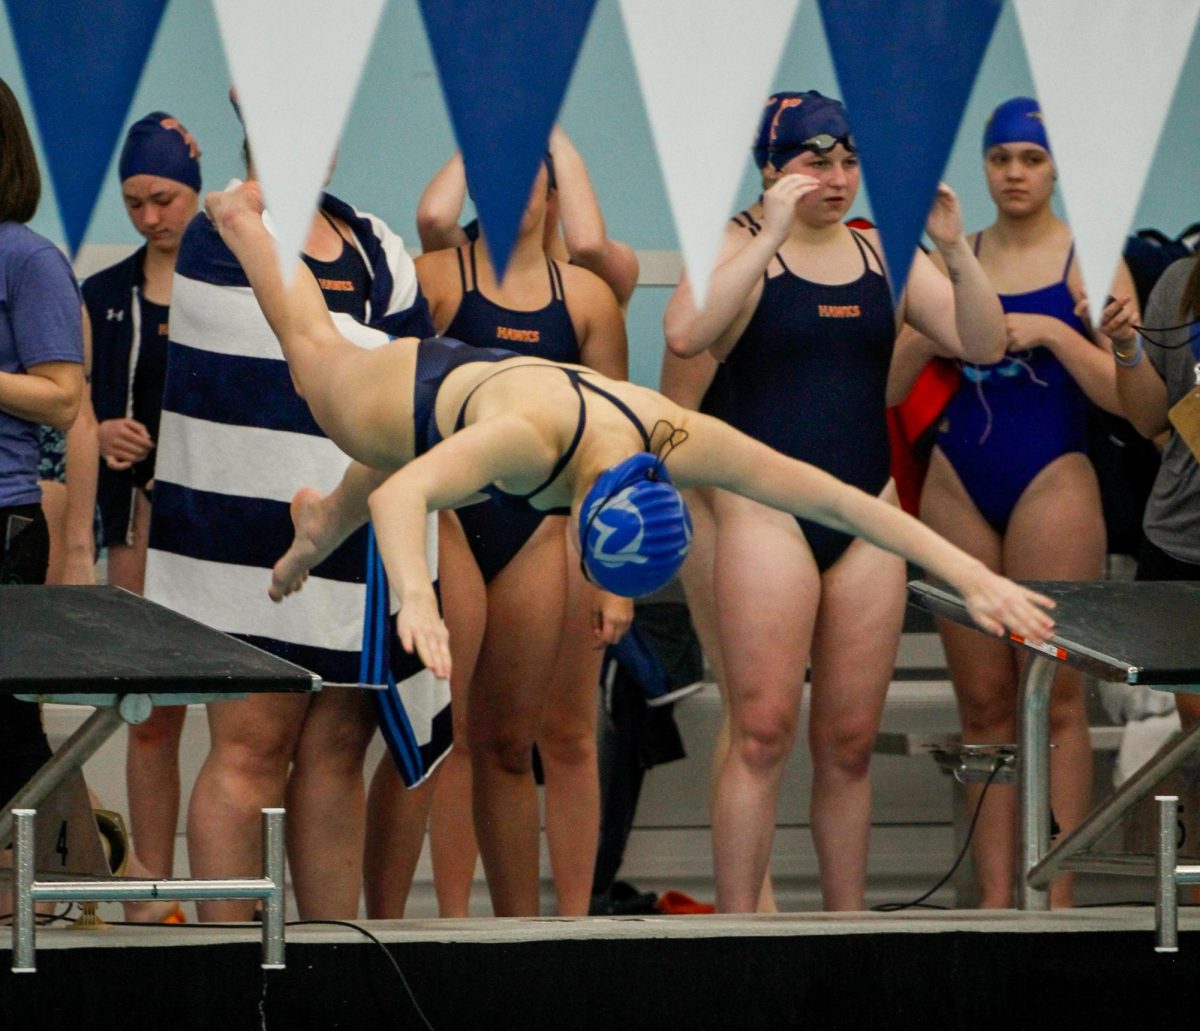 Senior+Lydia+Fink+dives+off+the+block+during+the+Olathe+City+Meet+on+March+21.